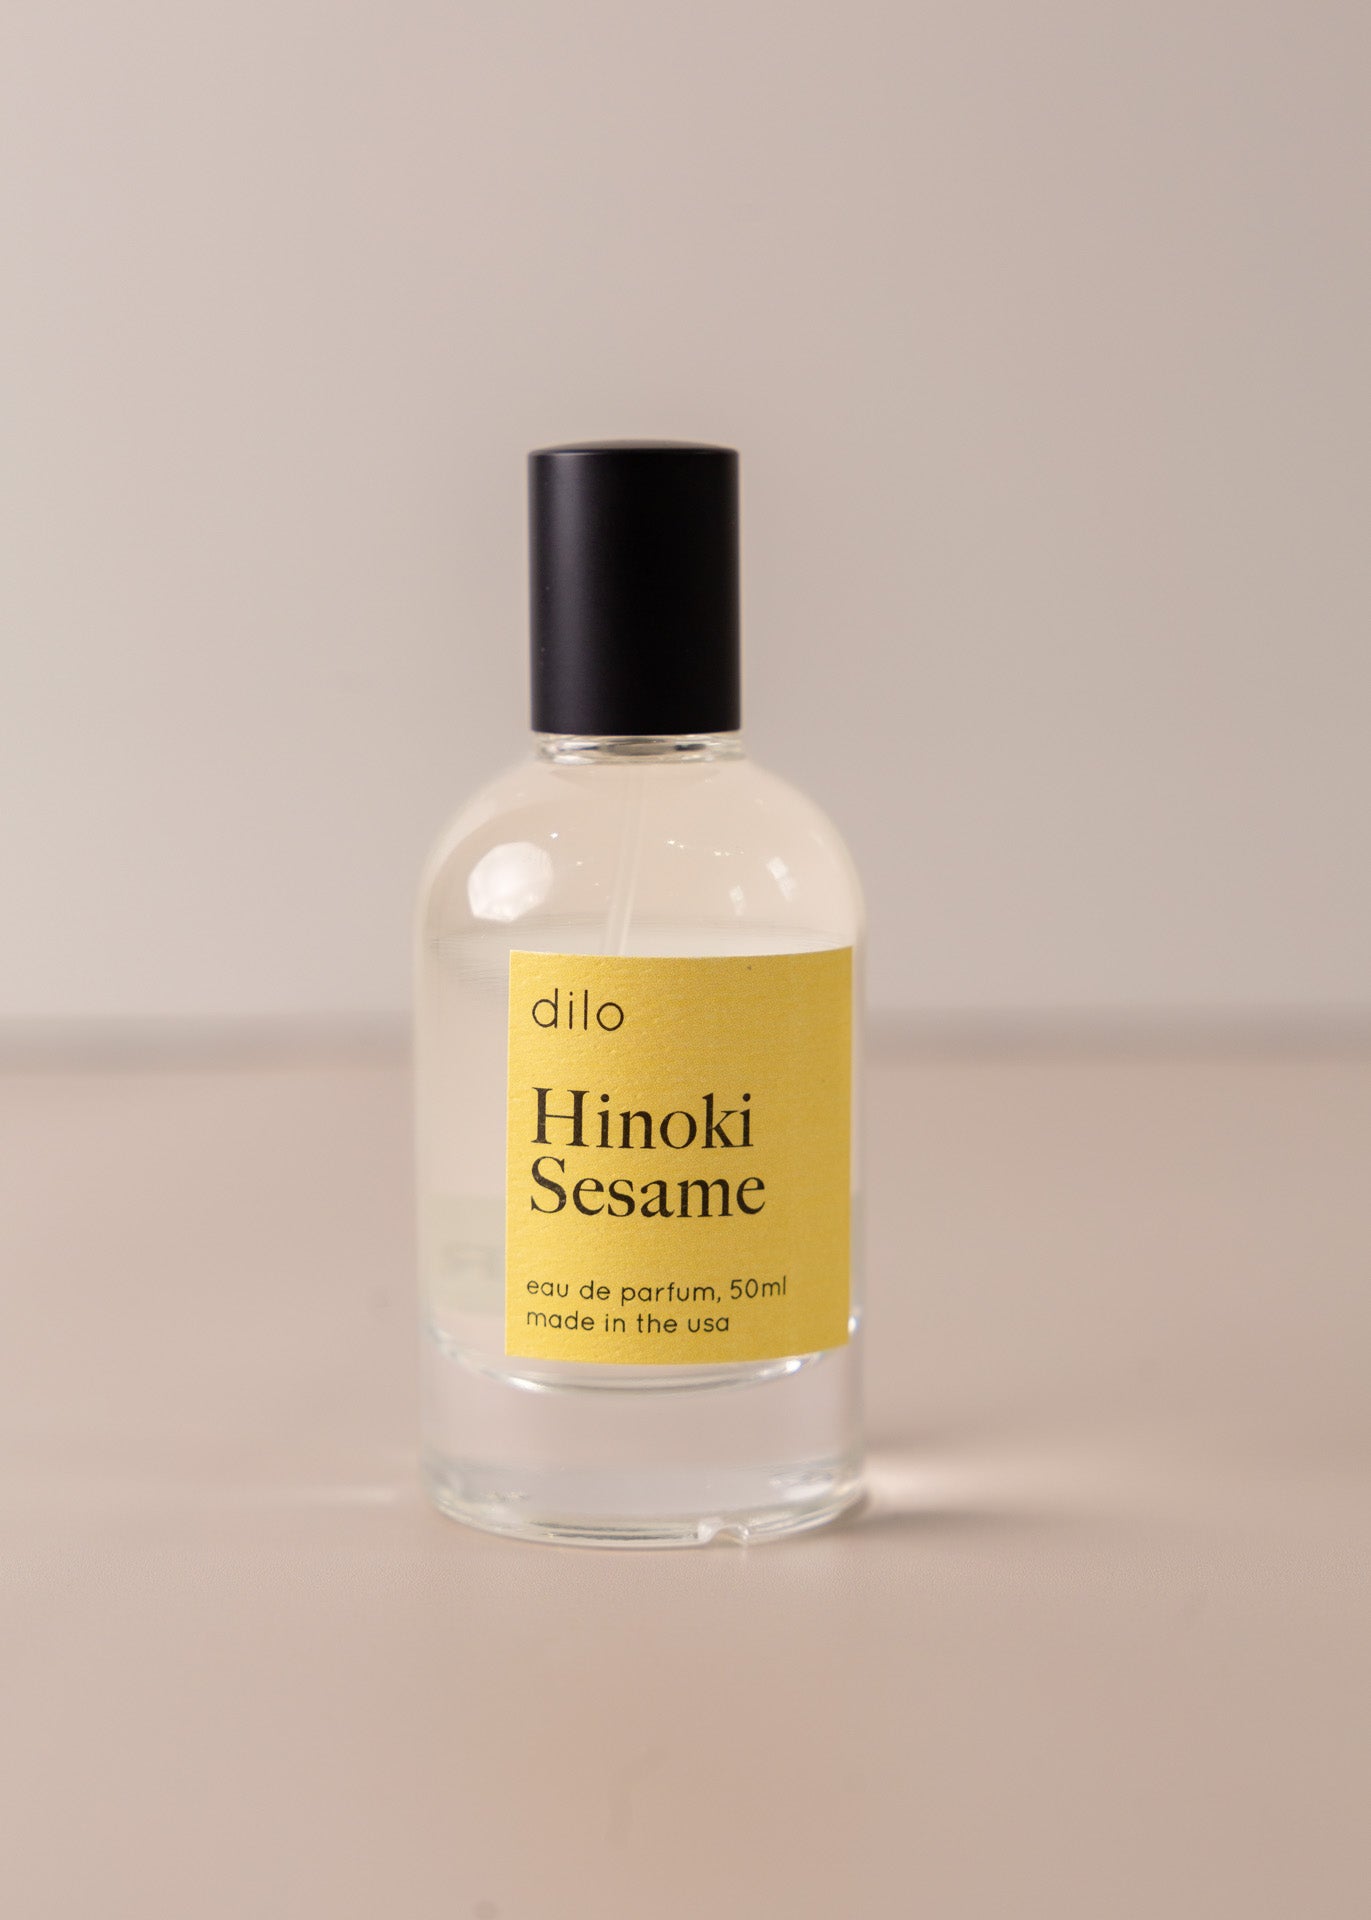 Bottle of perfume by dilo, with a yellow label on the front stating &quot;hinoki sesame. eau de parfum, 50 ml. made in the usa&quot;